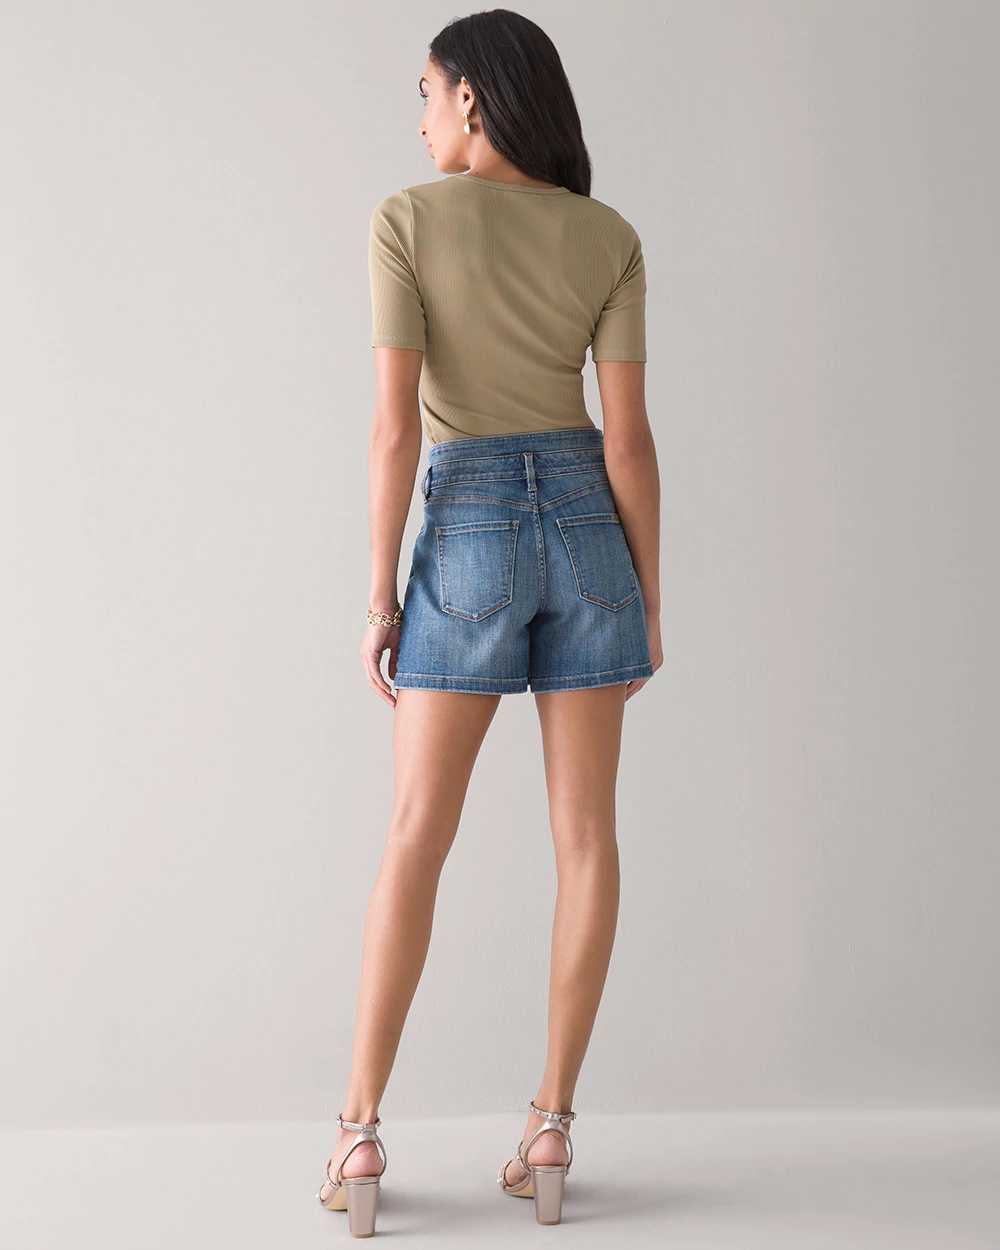 High-Rise Everyday Soft Denim  Pleated 5-Inch Shorts click to view larger image.